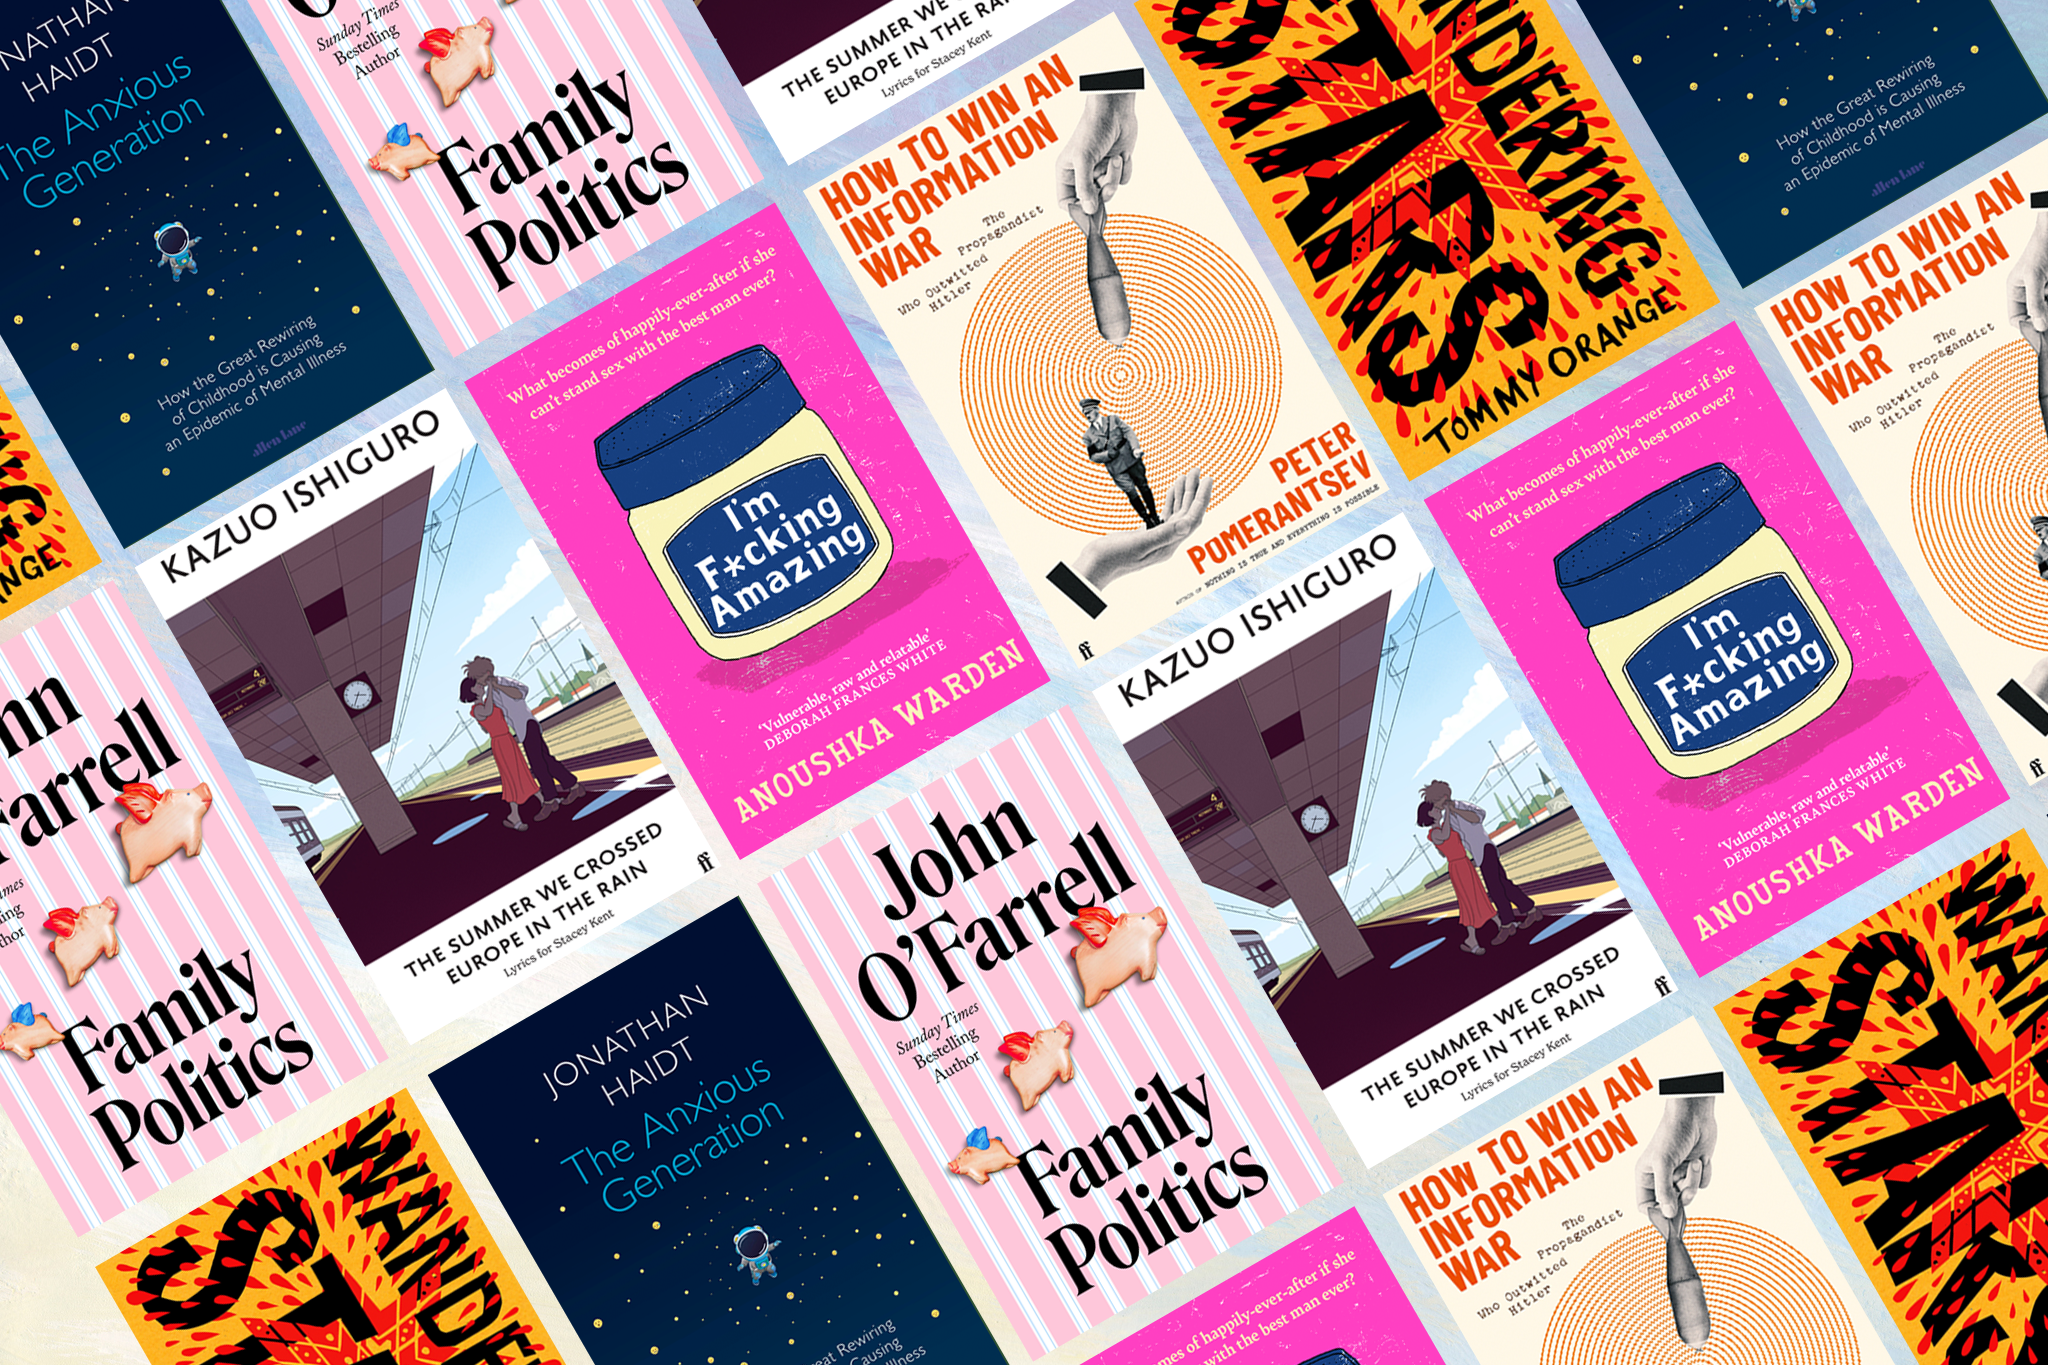 Our guide to March’s best books